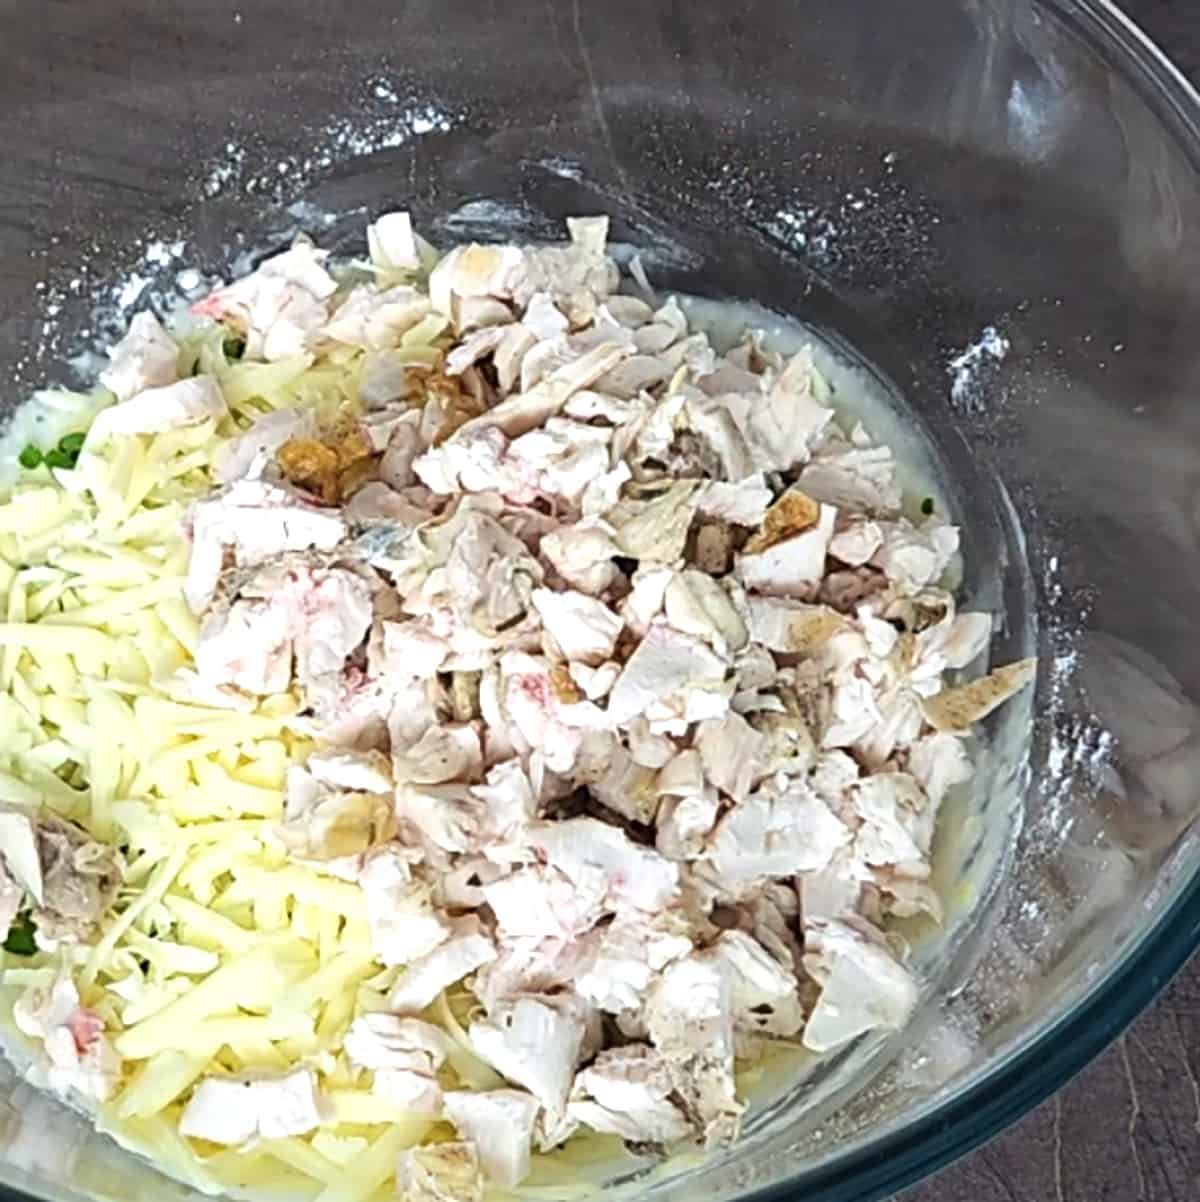 Add leftover chicken or cooked chicken, herbs and cheese.